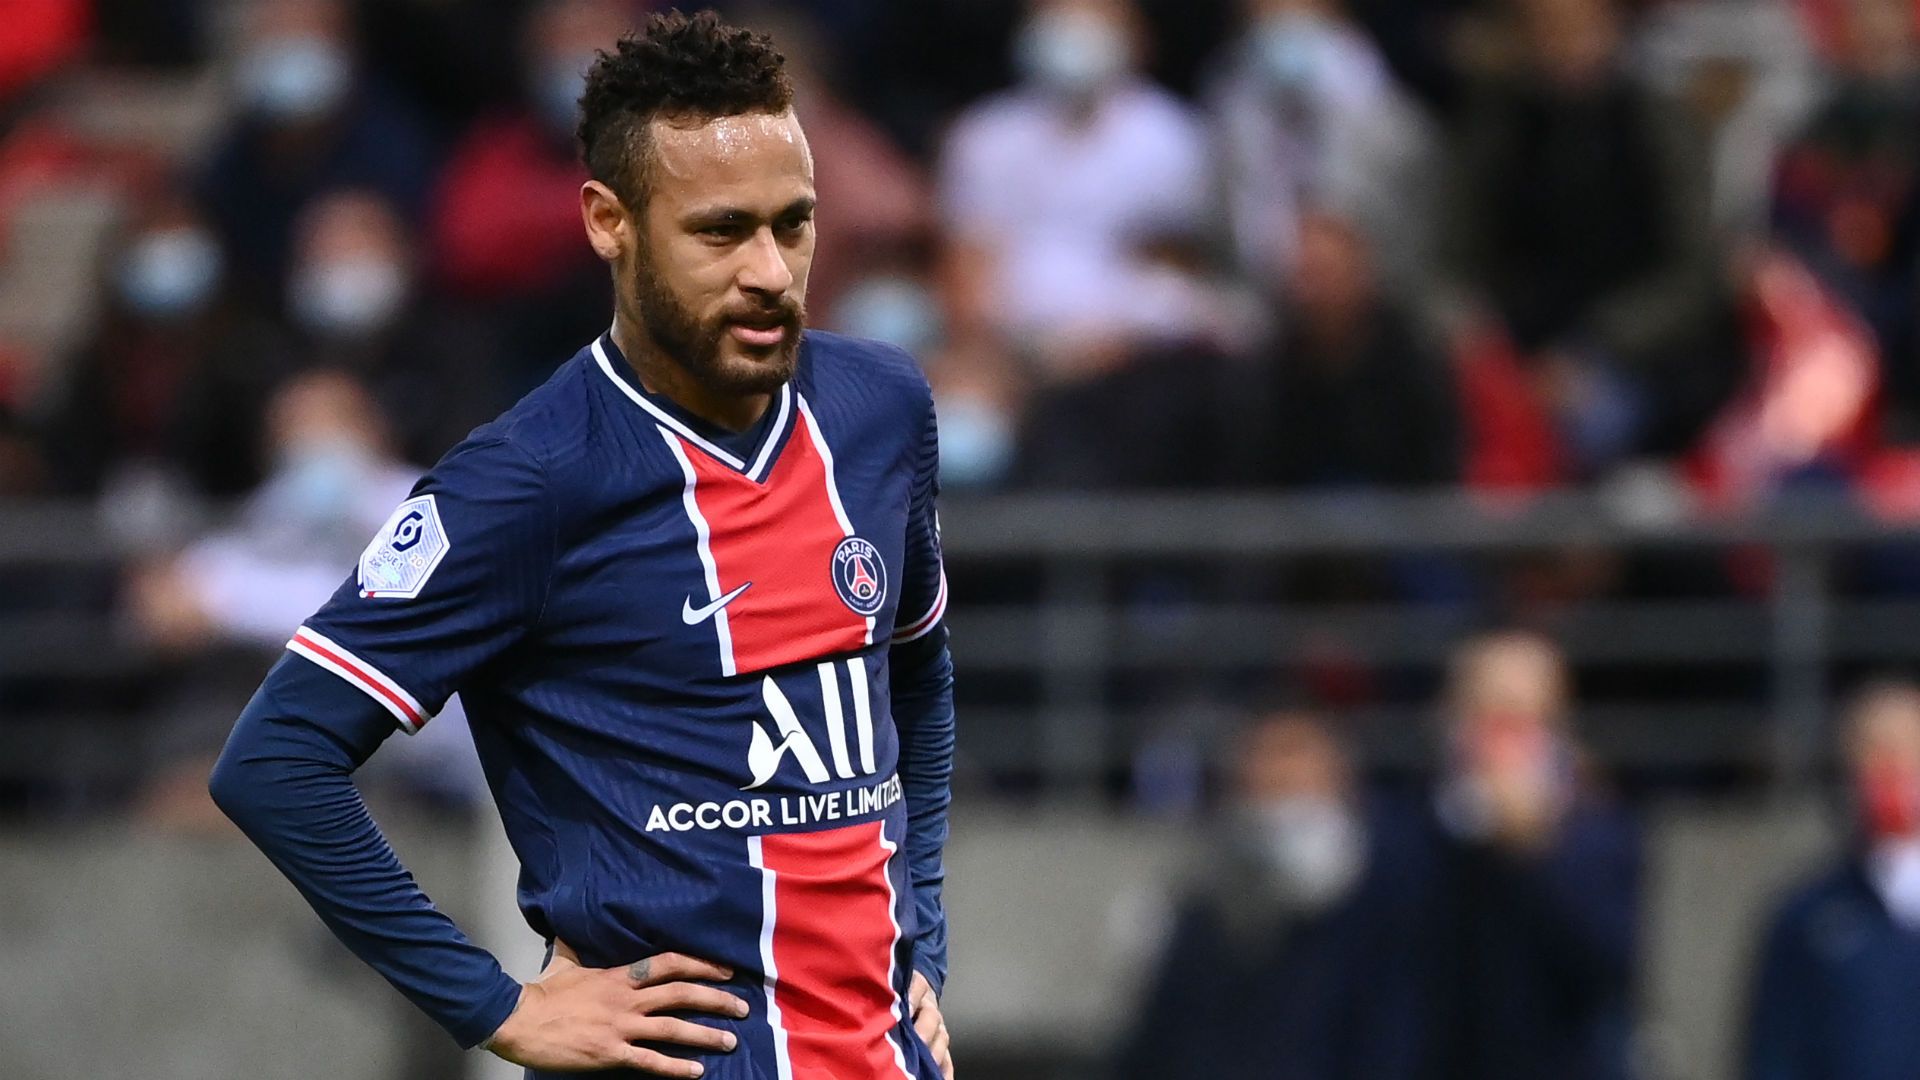 PSG ready to risk Neymar in key Champions League clash despite Brazilian being far from match fit